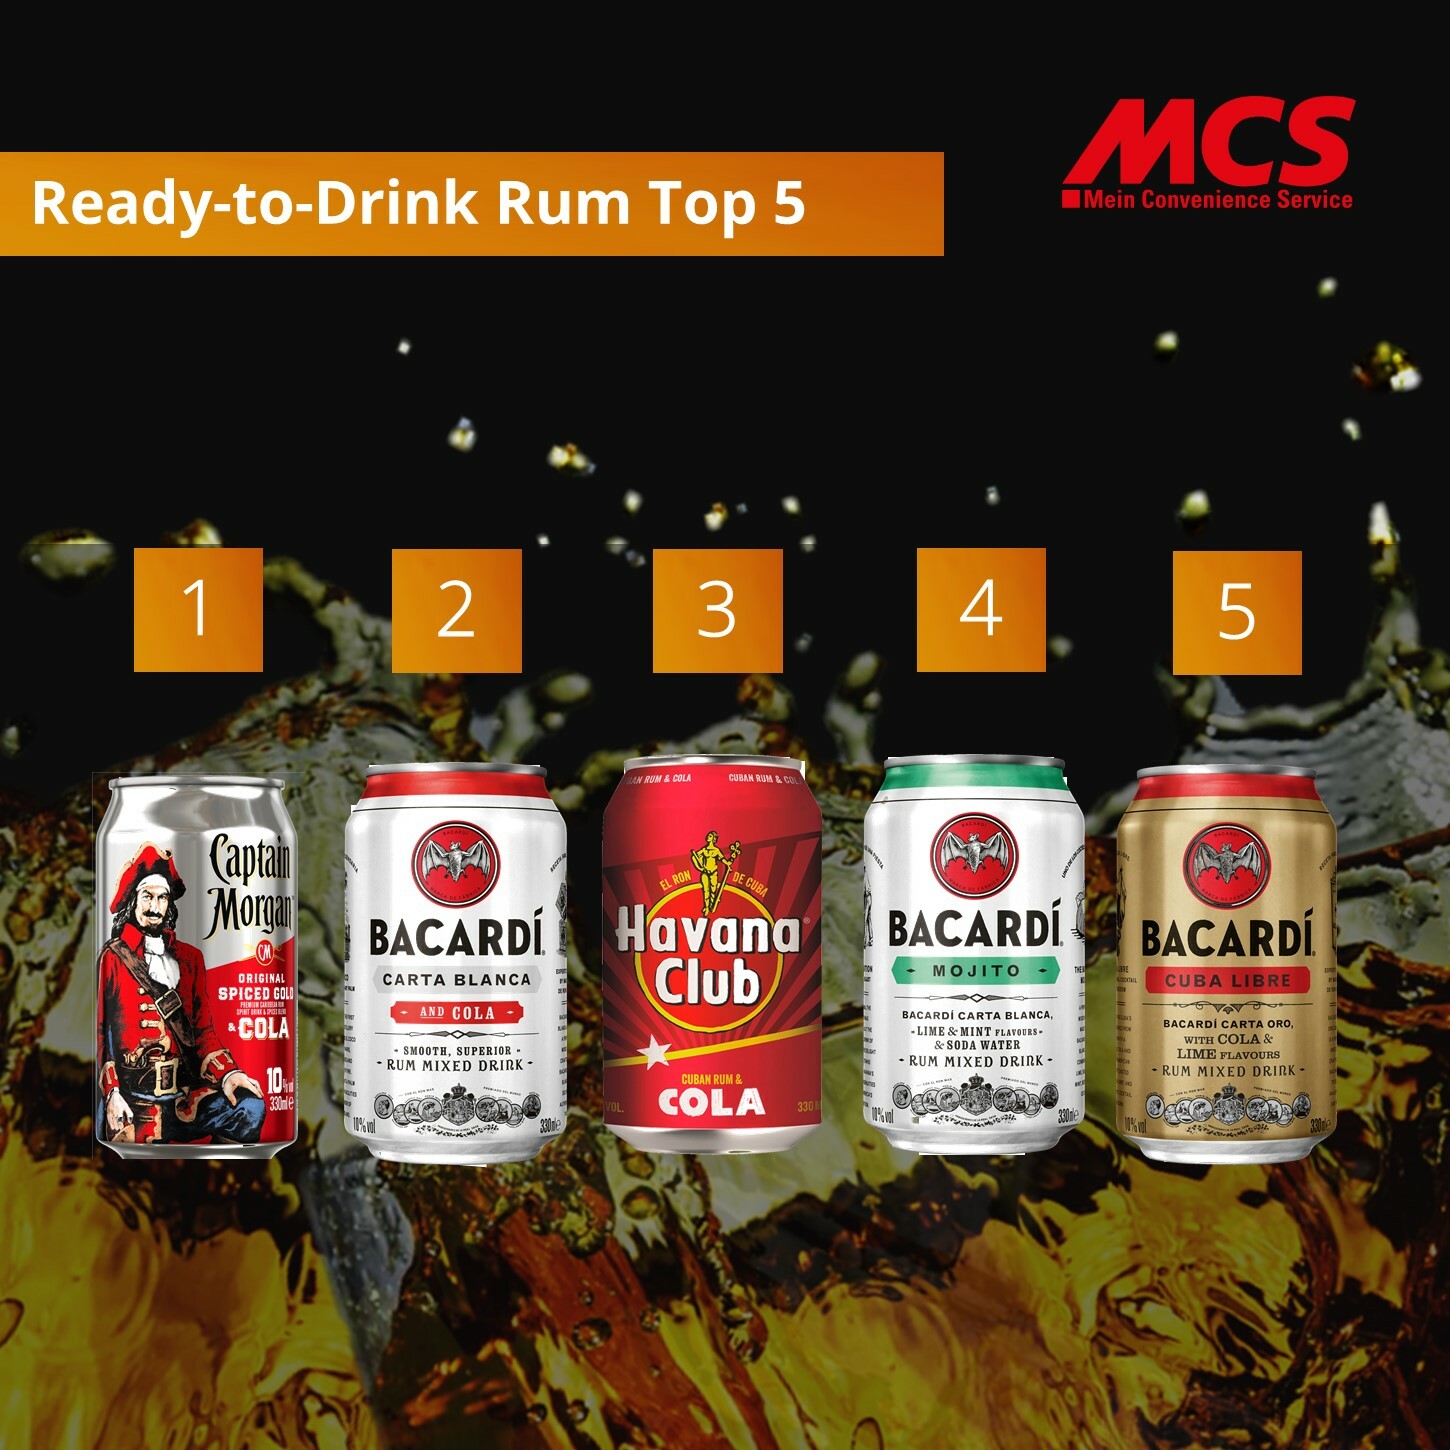 Ranking ready-to-Drink Rum